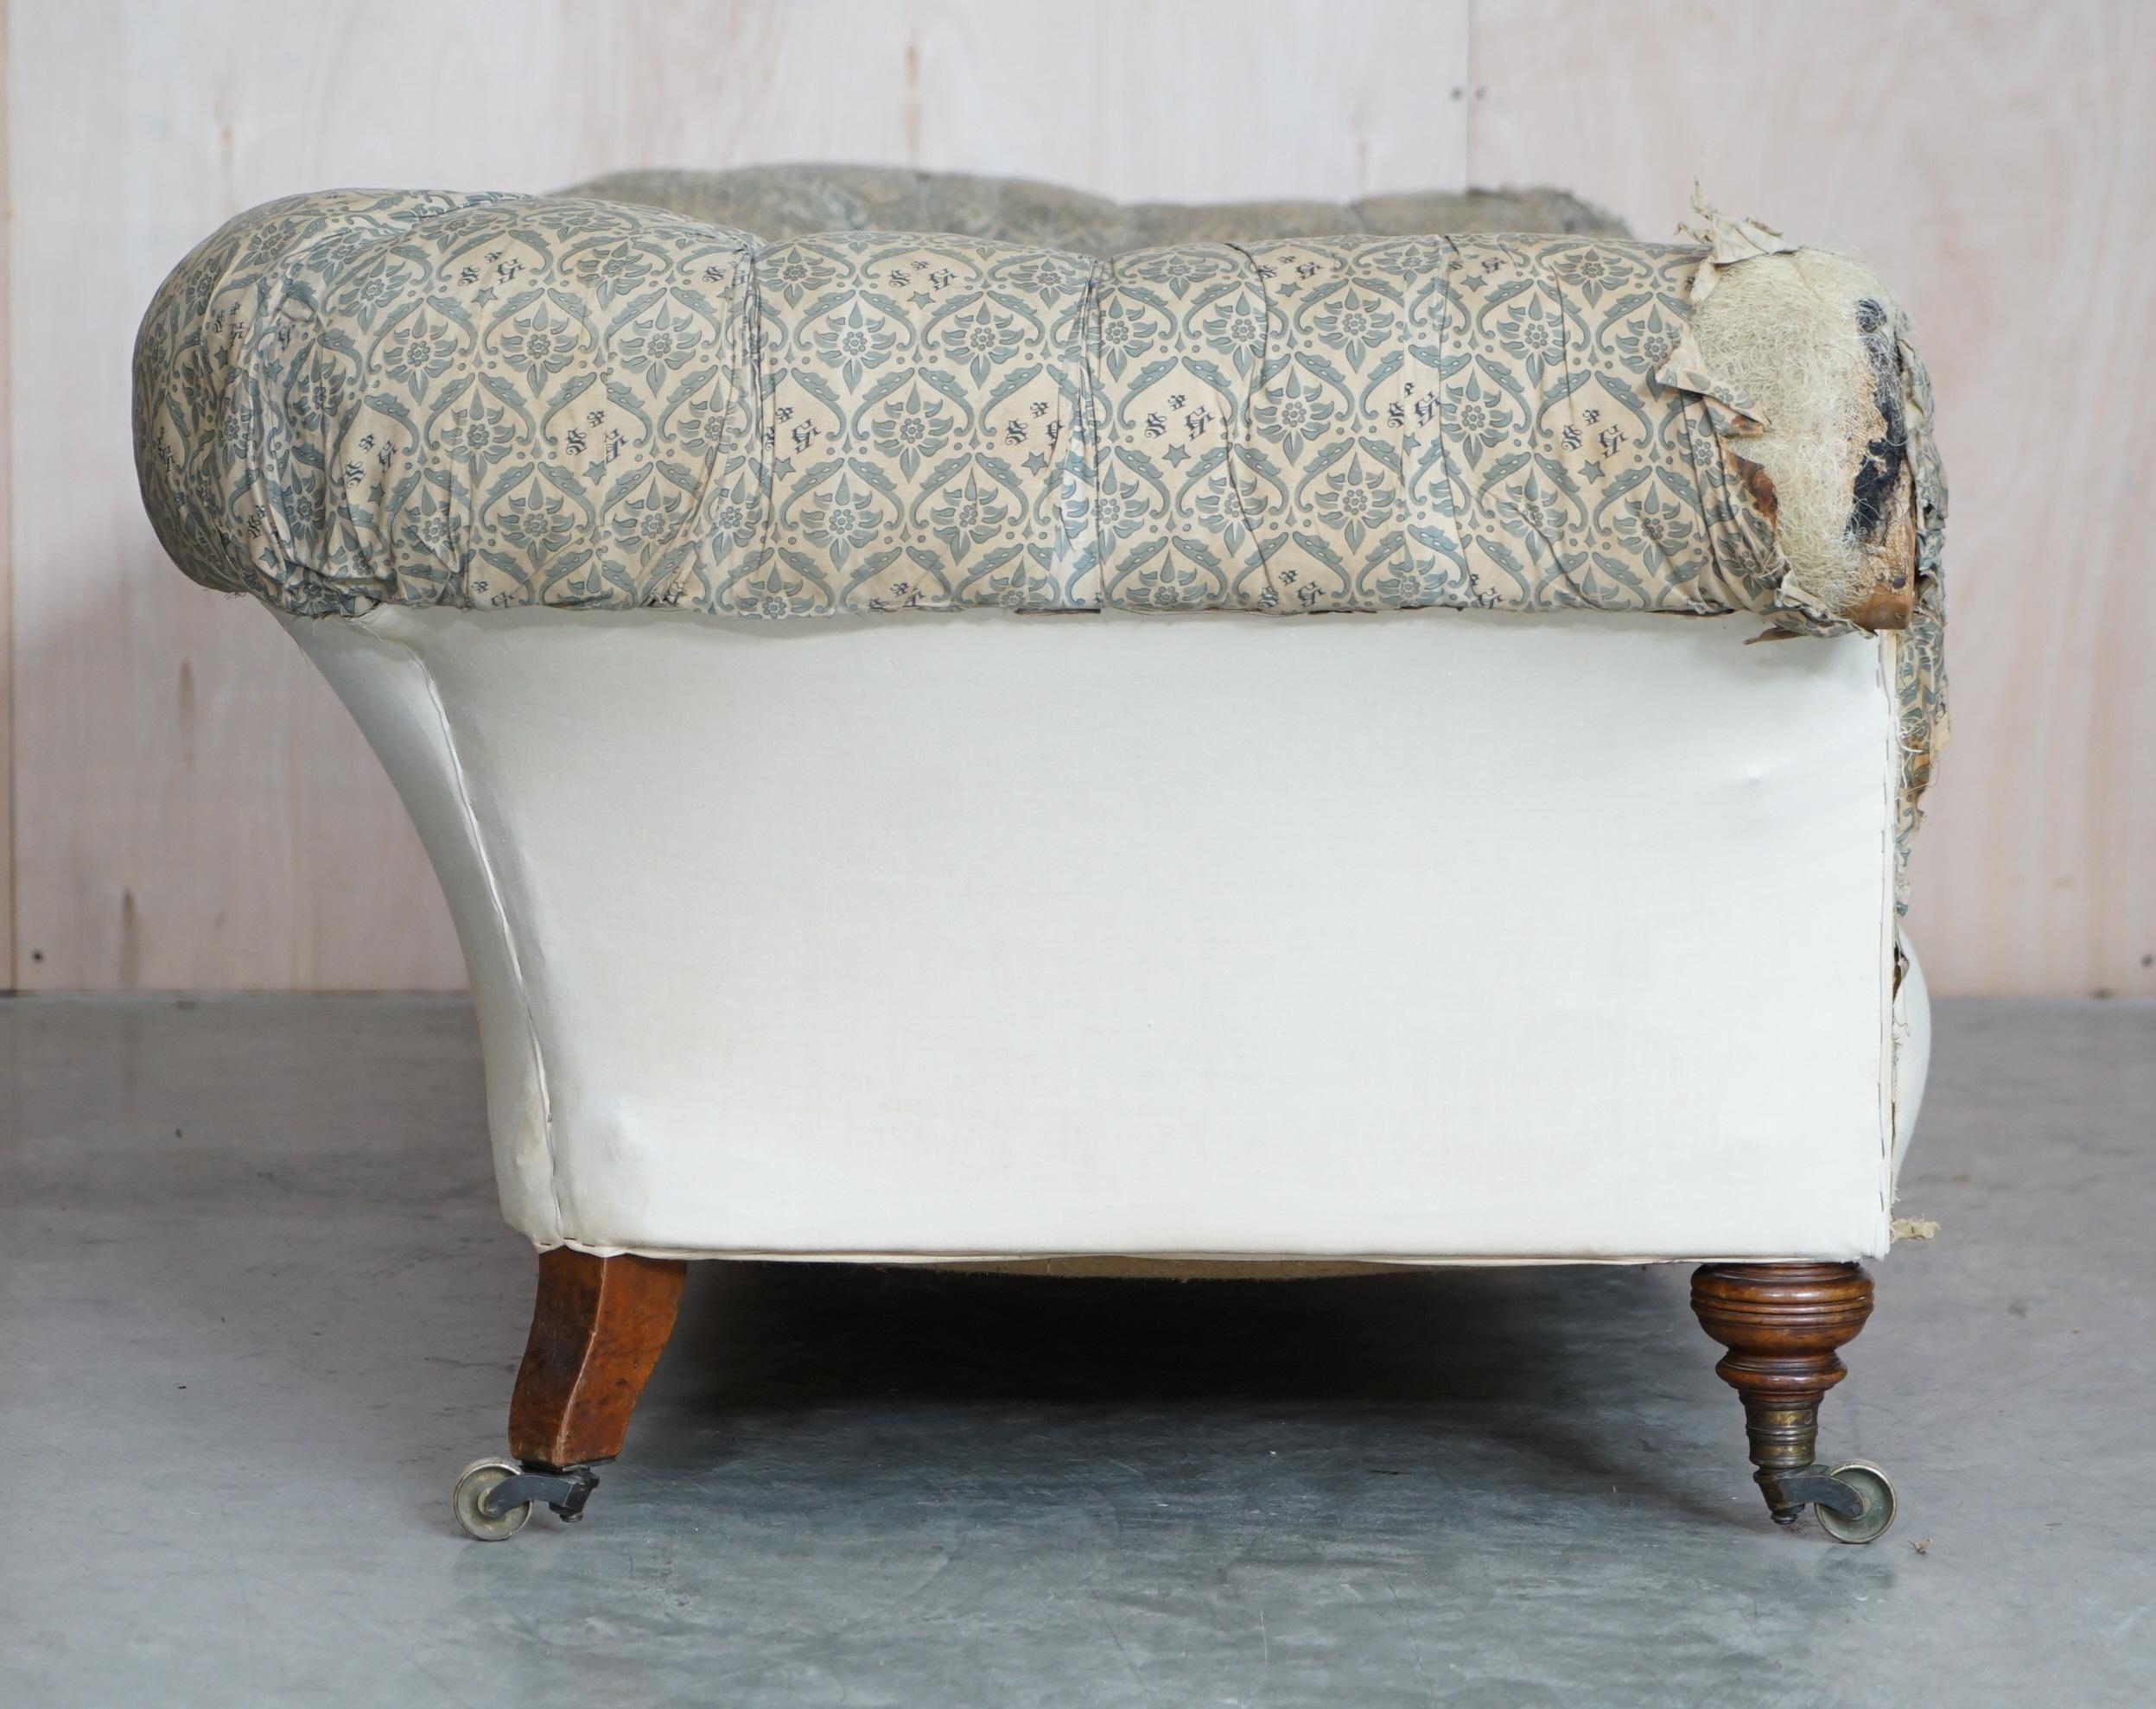 Important Antique Victorian Howard & Son's Chesterfield Sofa Inc Ticking Fabric For Sale 5